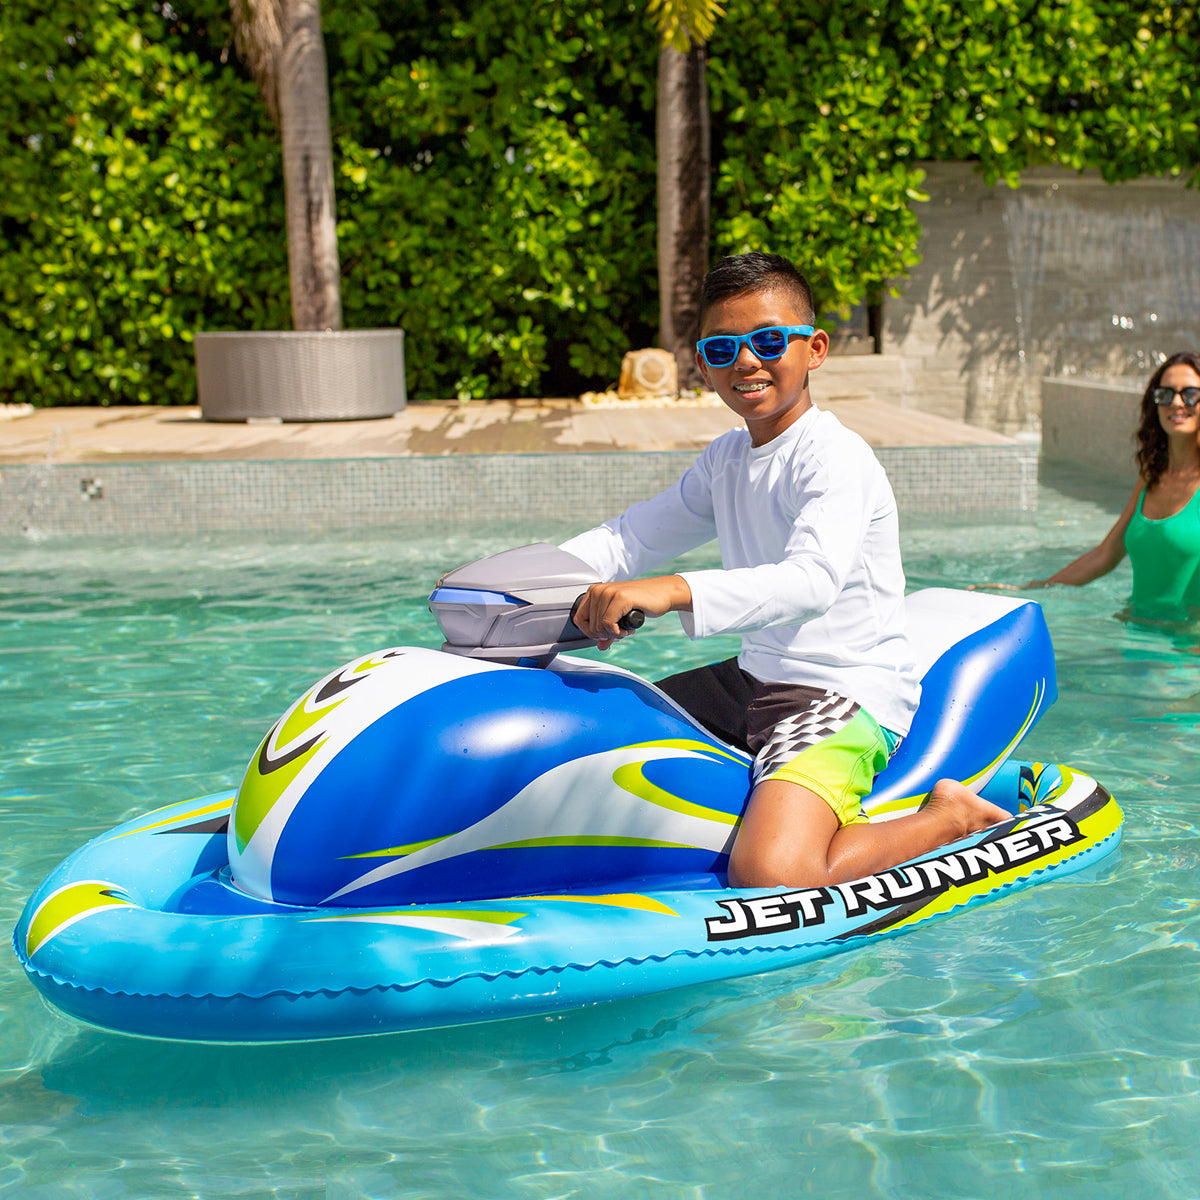 PoolCandy Jet Runner Motorized Inflatable Kids Pool Toy Fast Fun Safe Powered